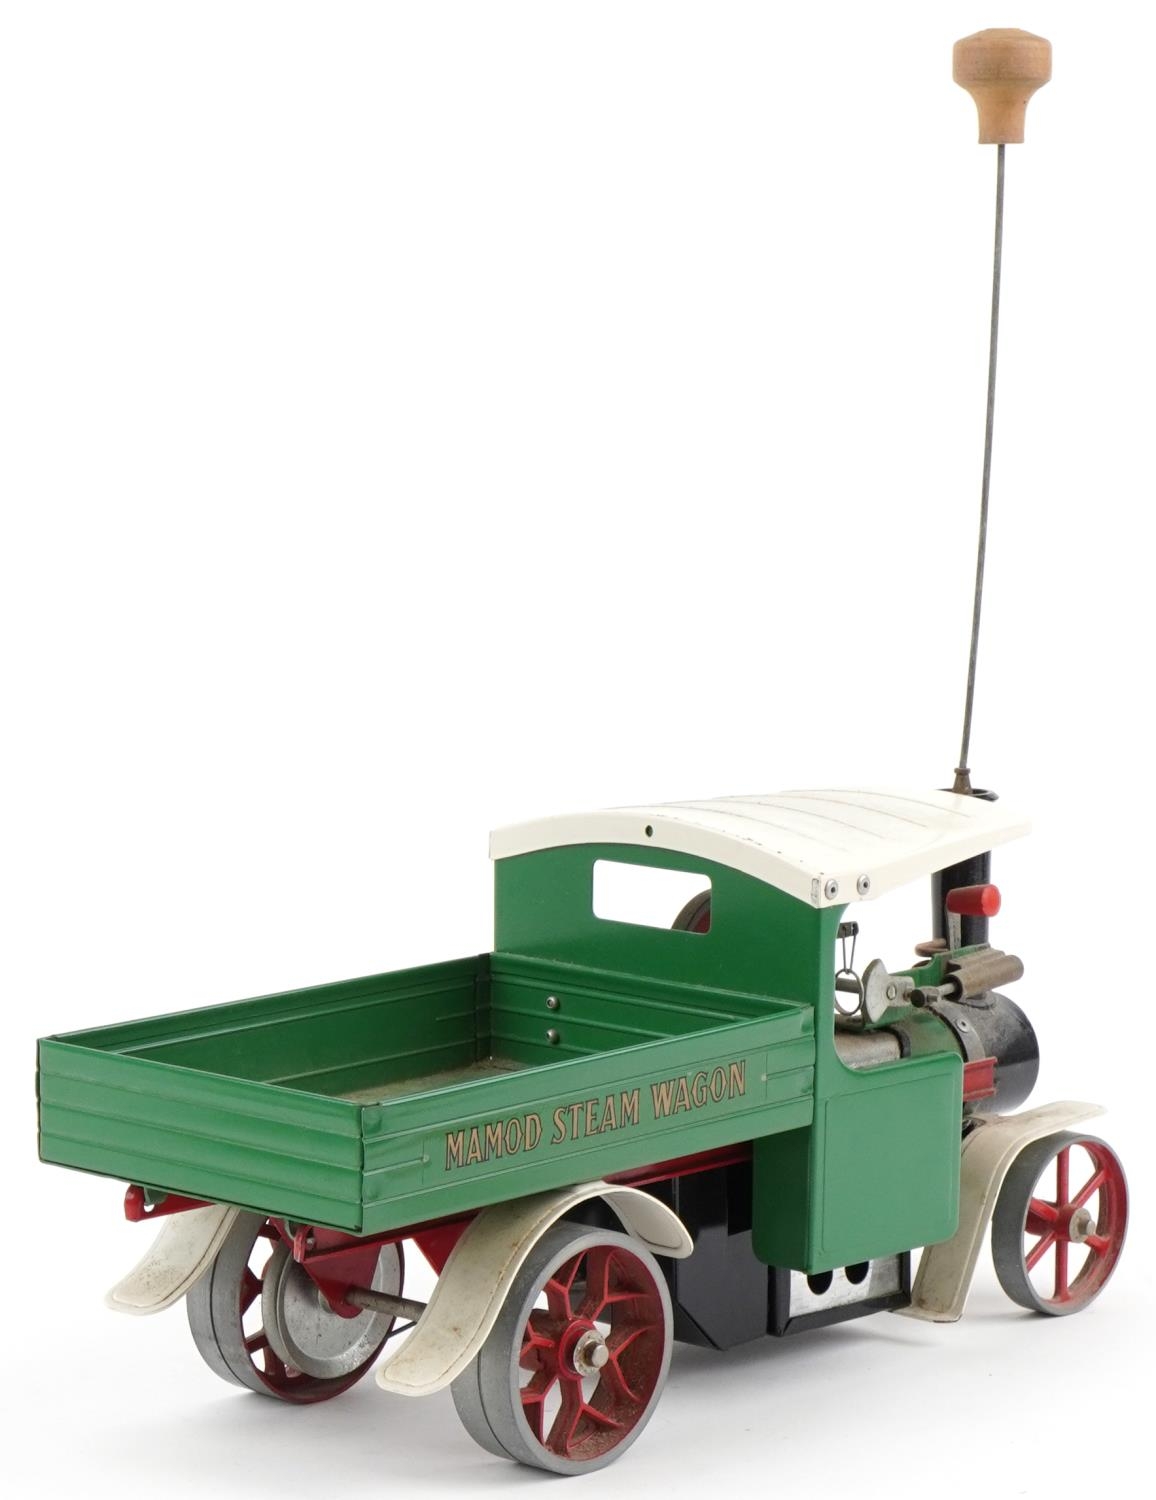 Vintage Mamod live Steam Wagon, 40cm in length - Image 2 of 3